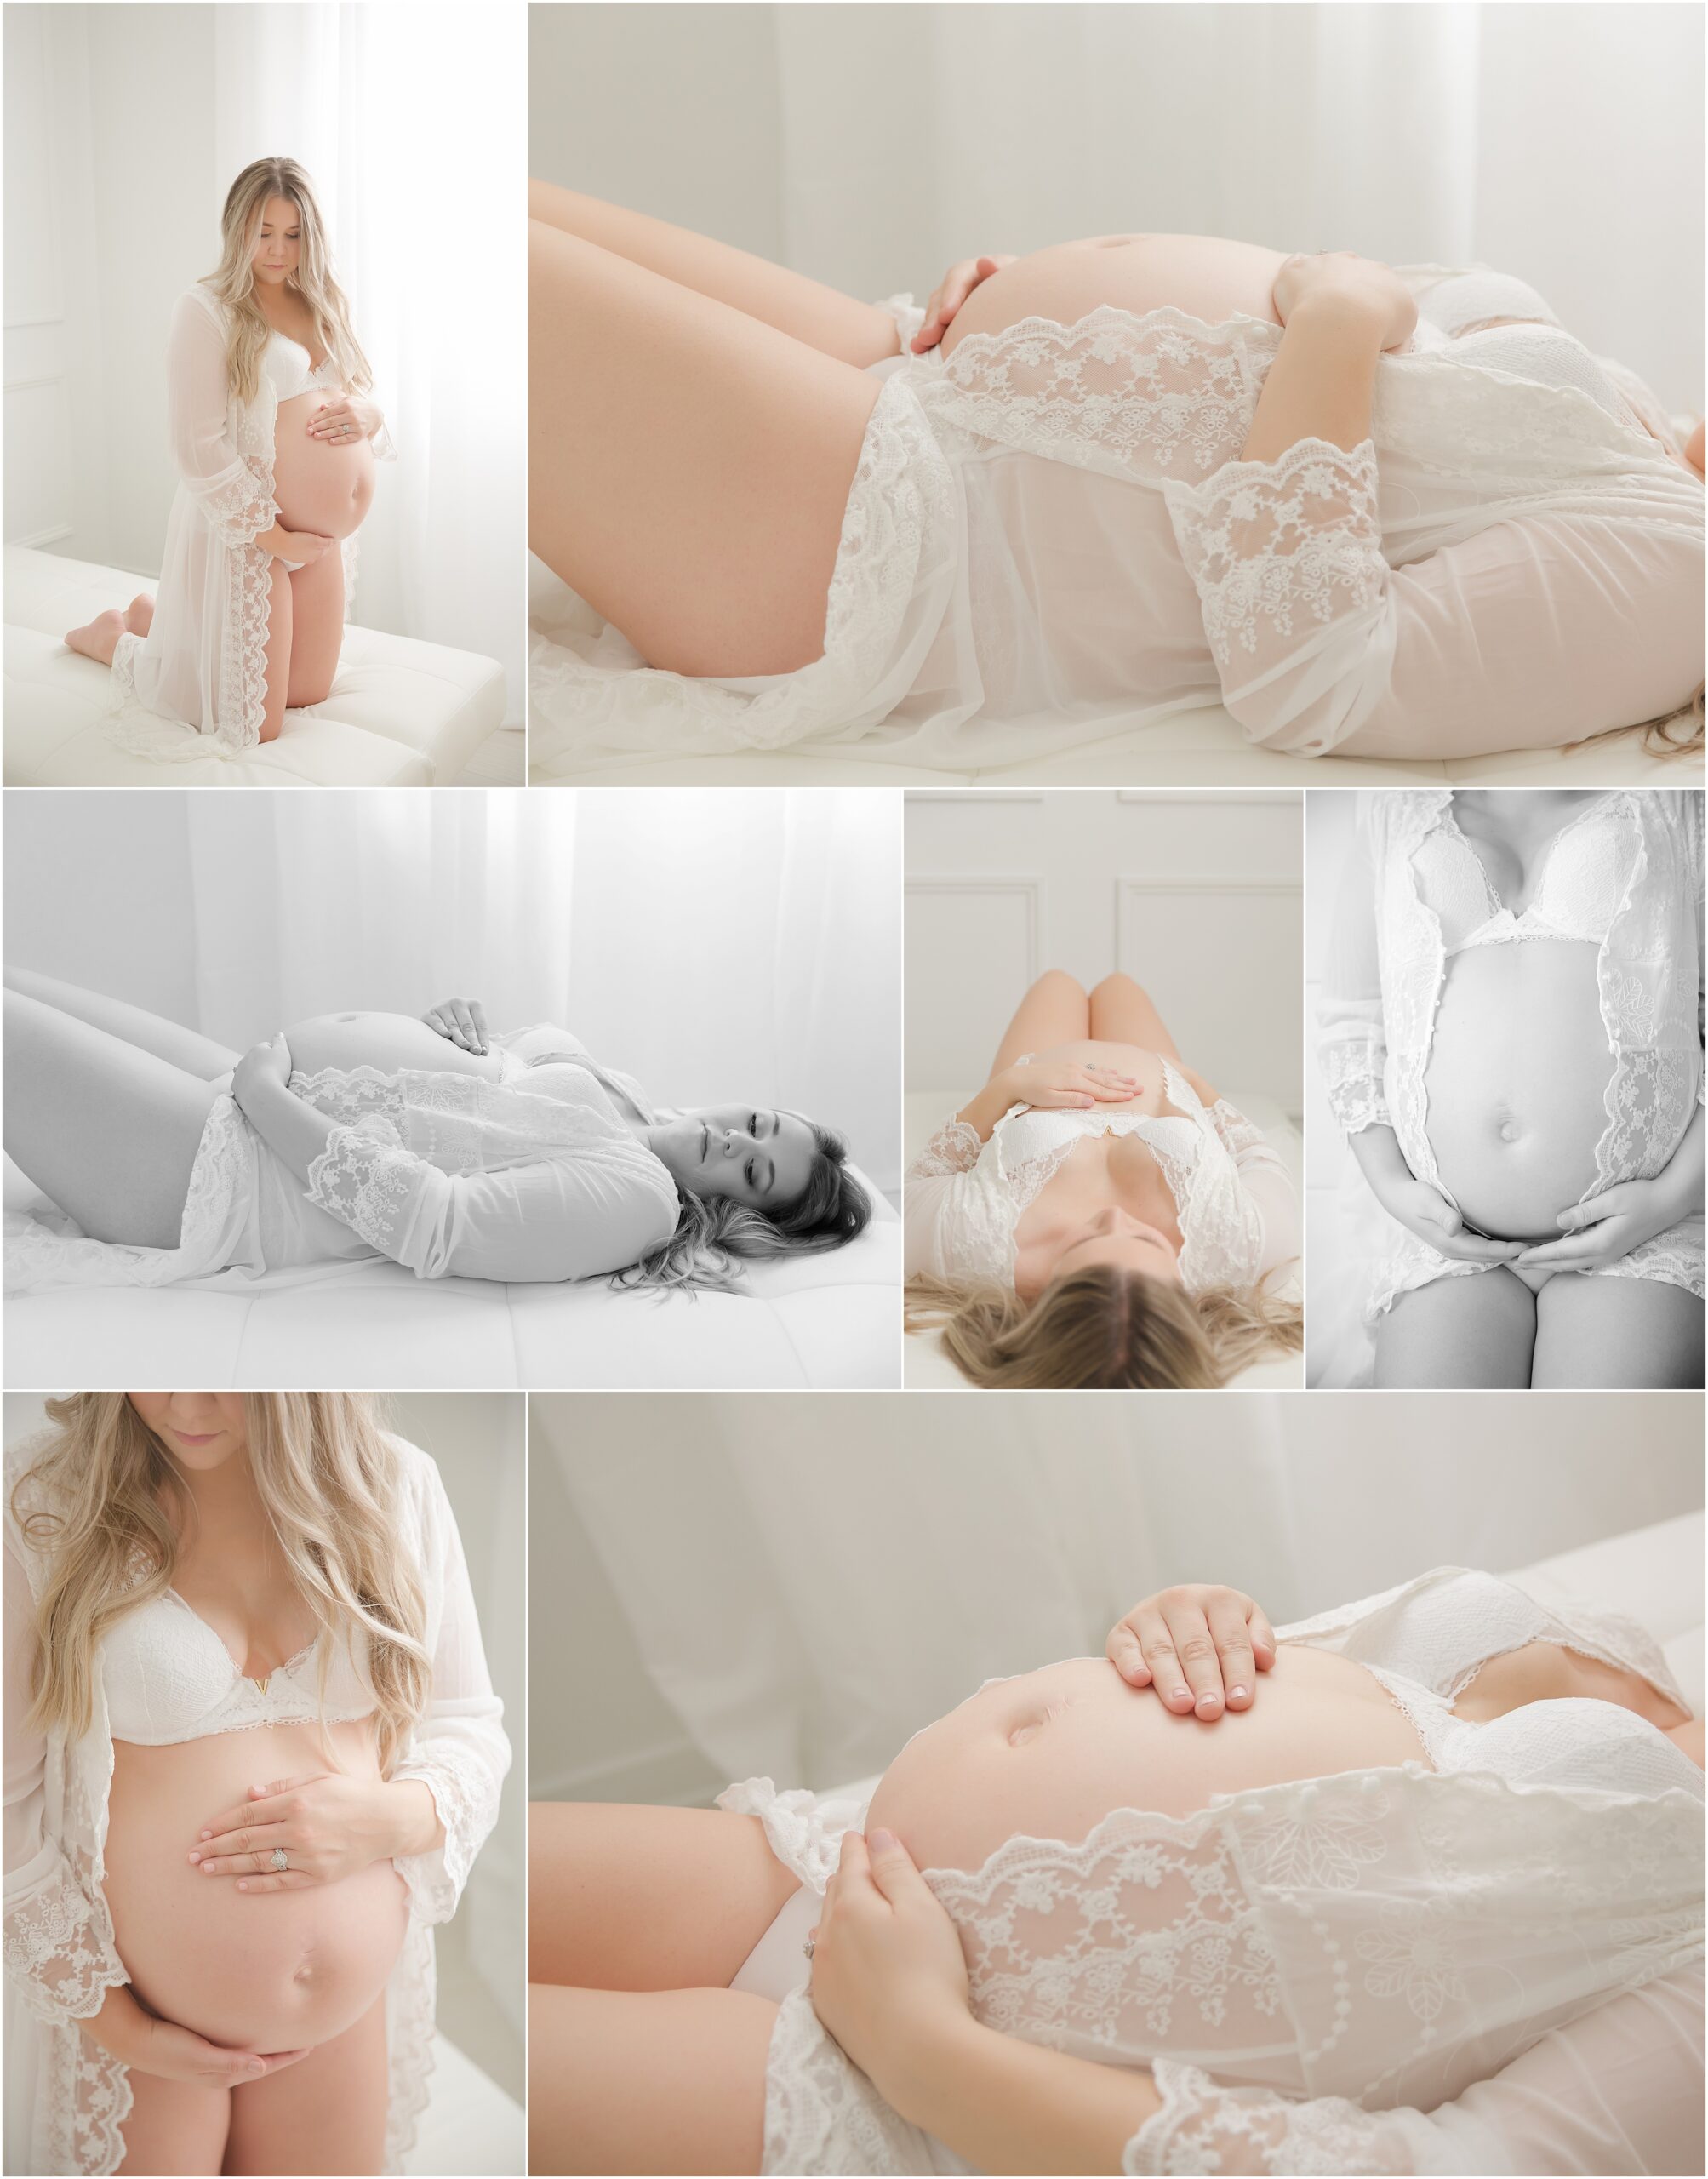 Pregnant woman with long blonde hair posing for maternity photos at Christy Johnson Photography in Wake Forest, NC